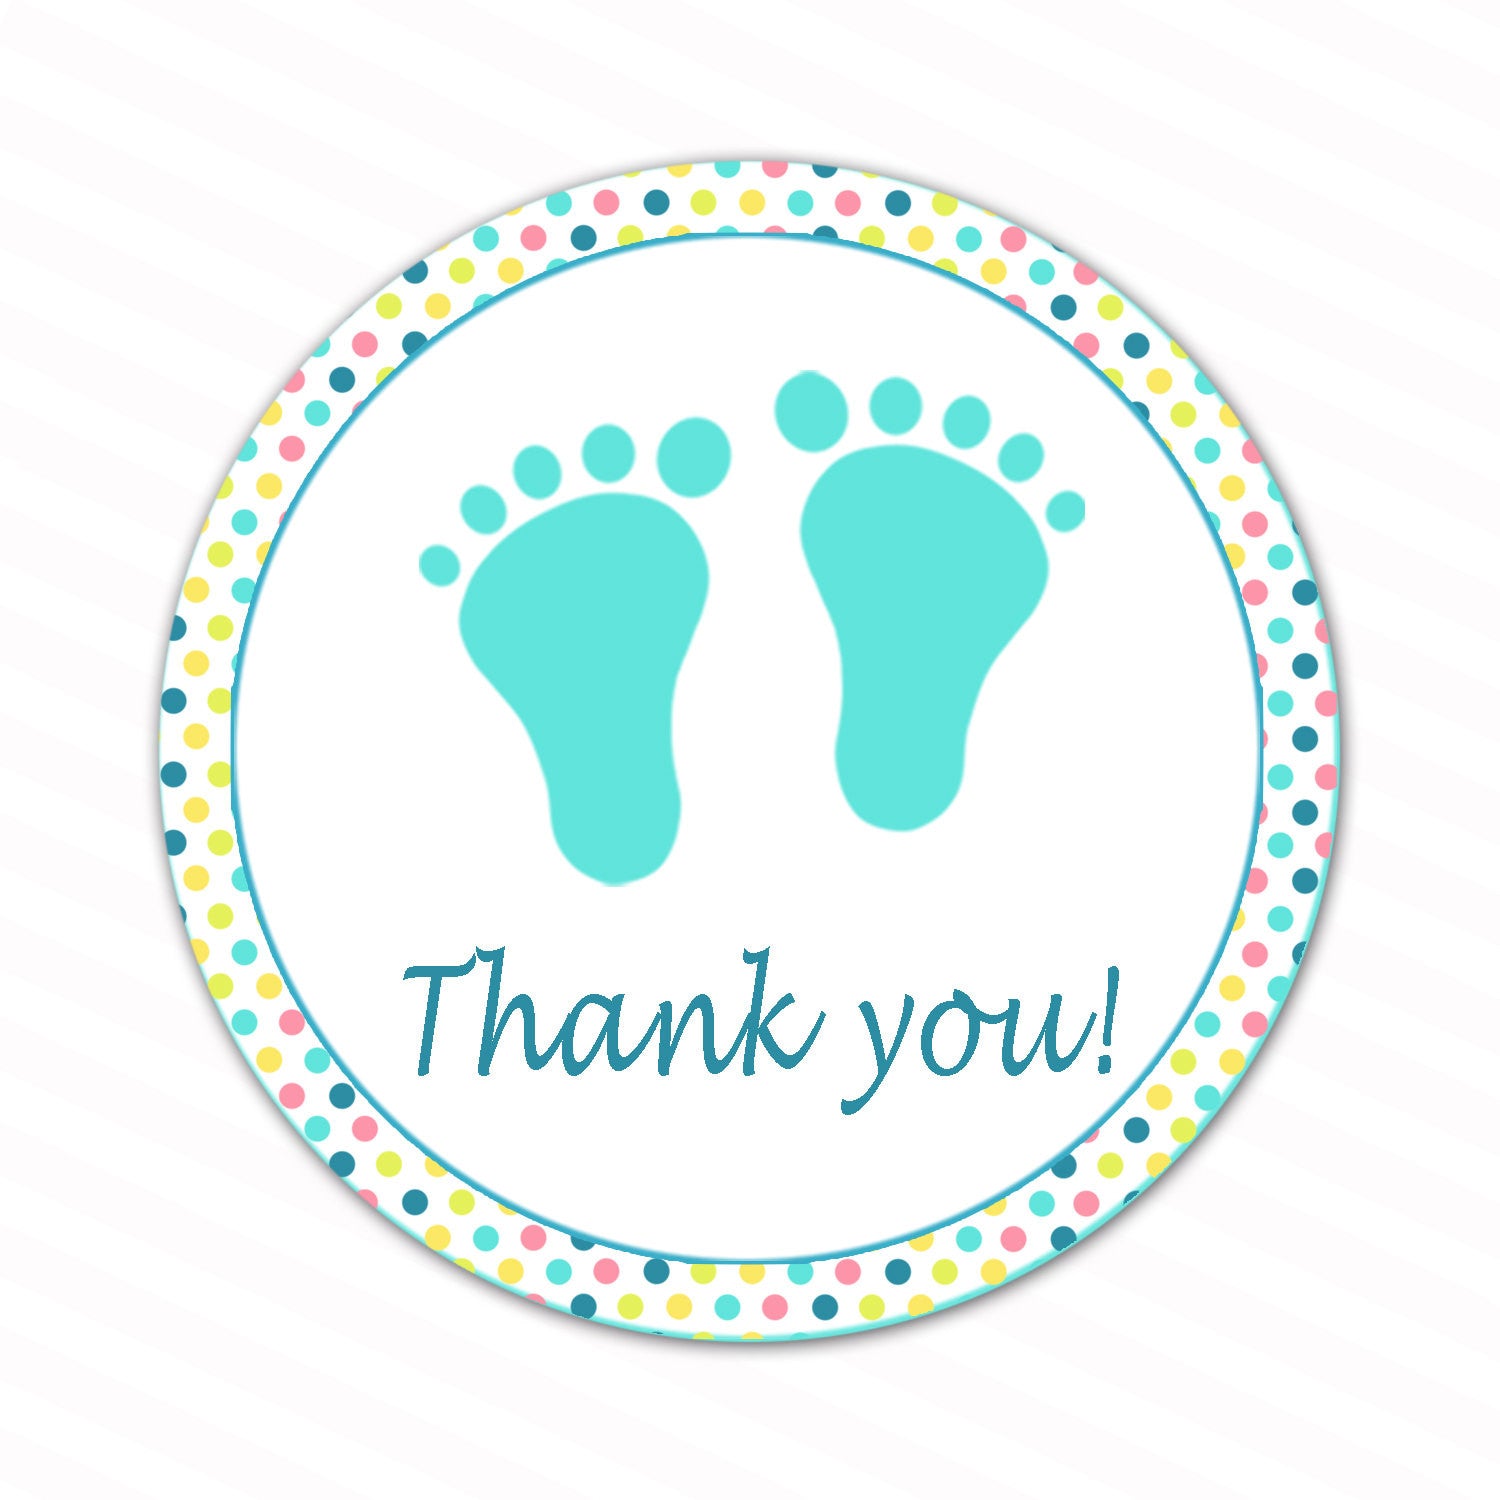 INSTANT DOWNLOAD Pastel Polka Dots Baby Feet Thank You Tags - Baby Shower Favors Baby Shower Items Party Favors Baby Shower Decorations